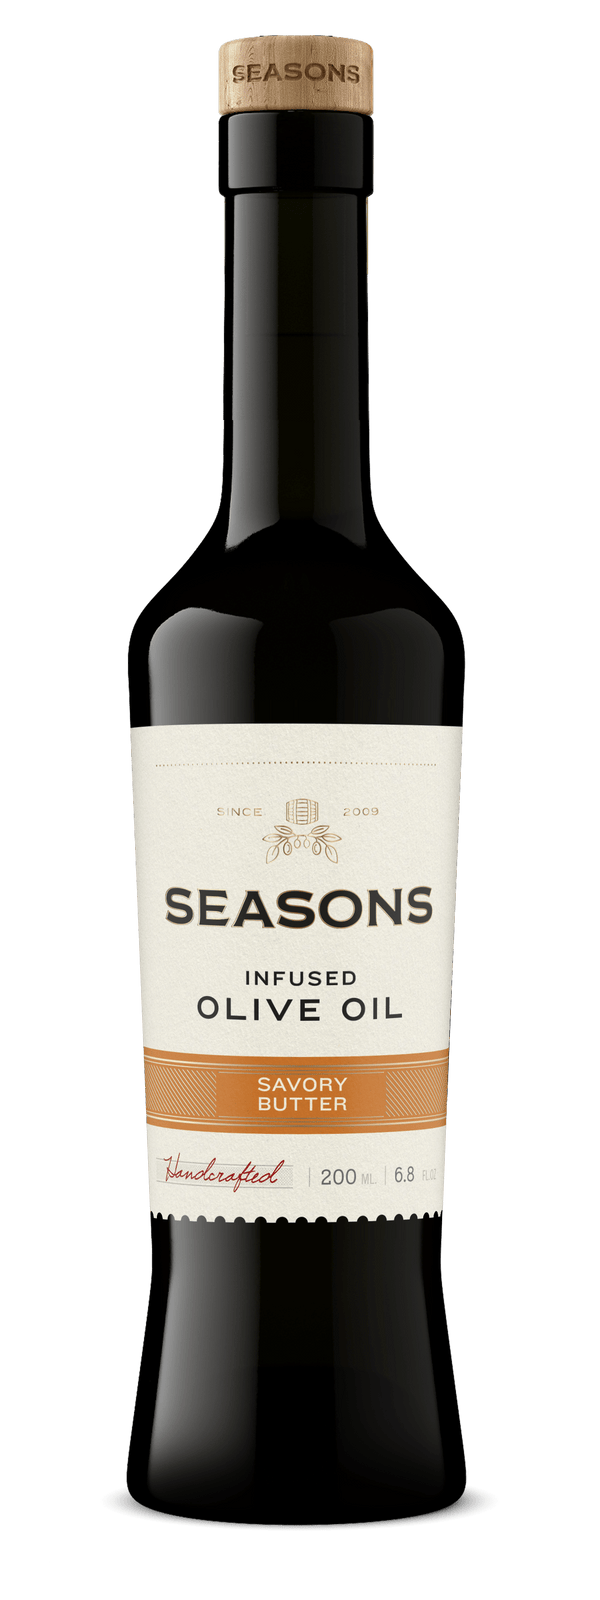 Seasons Infused Olive Oil 200mL Savory Butter